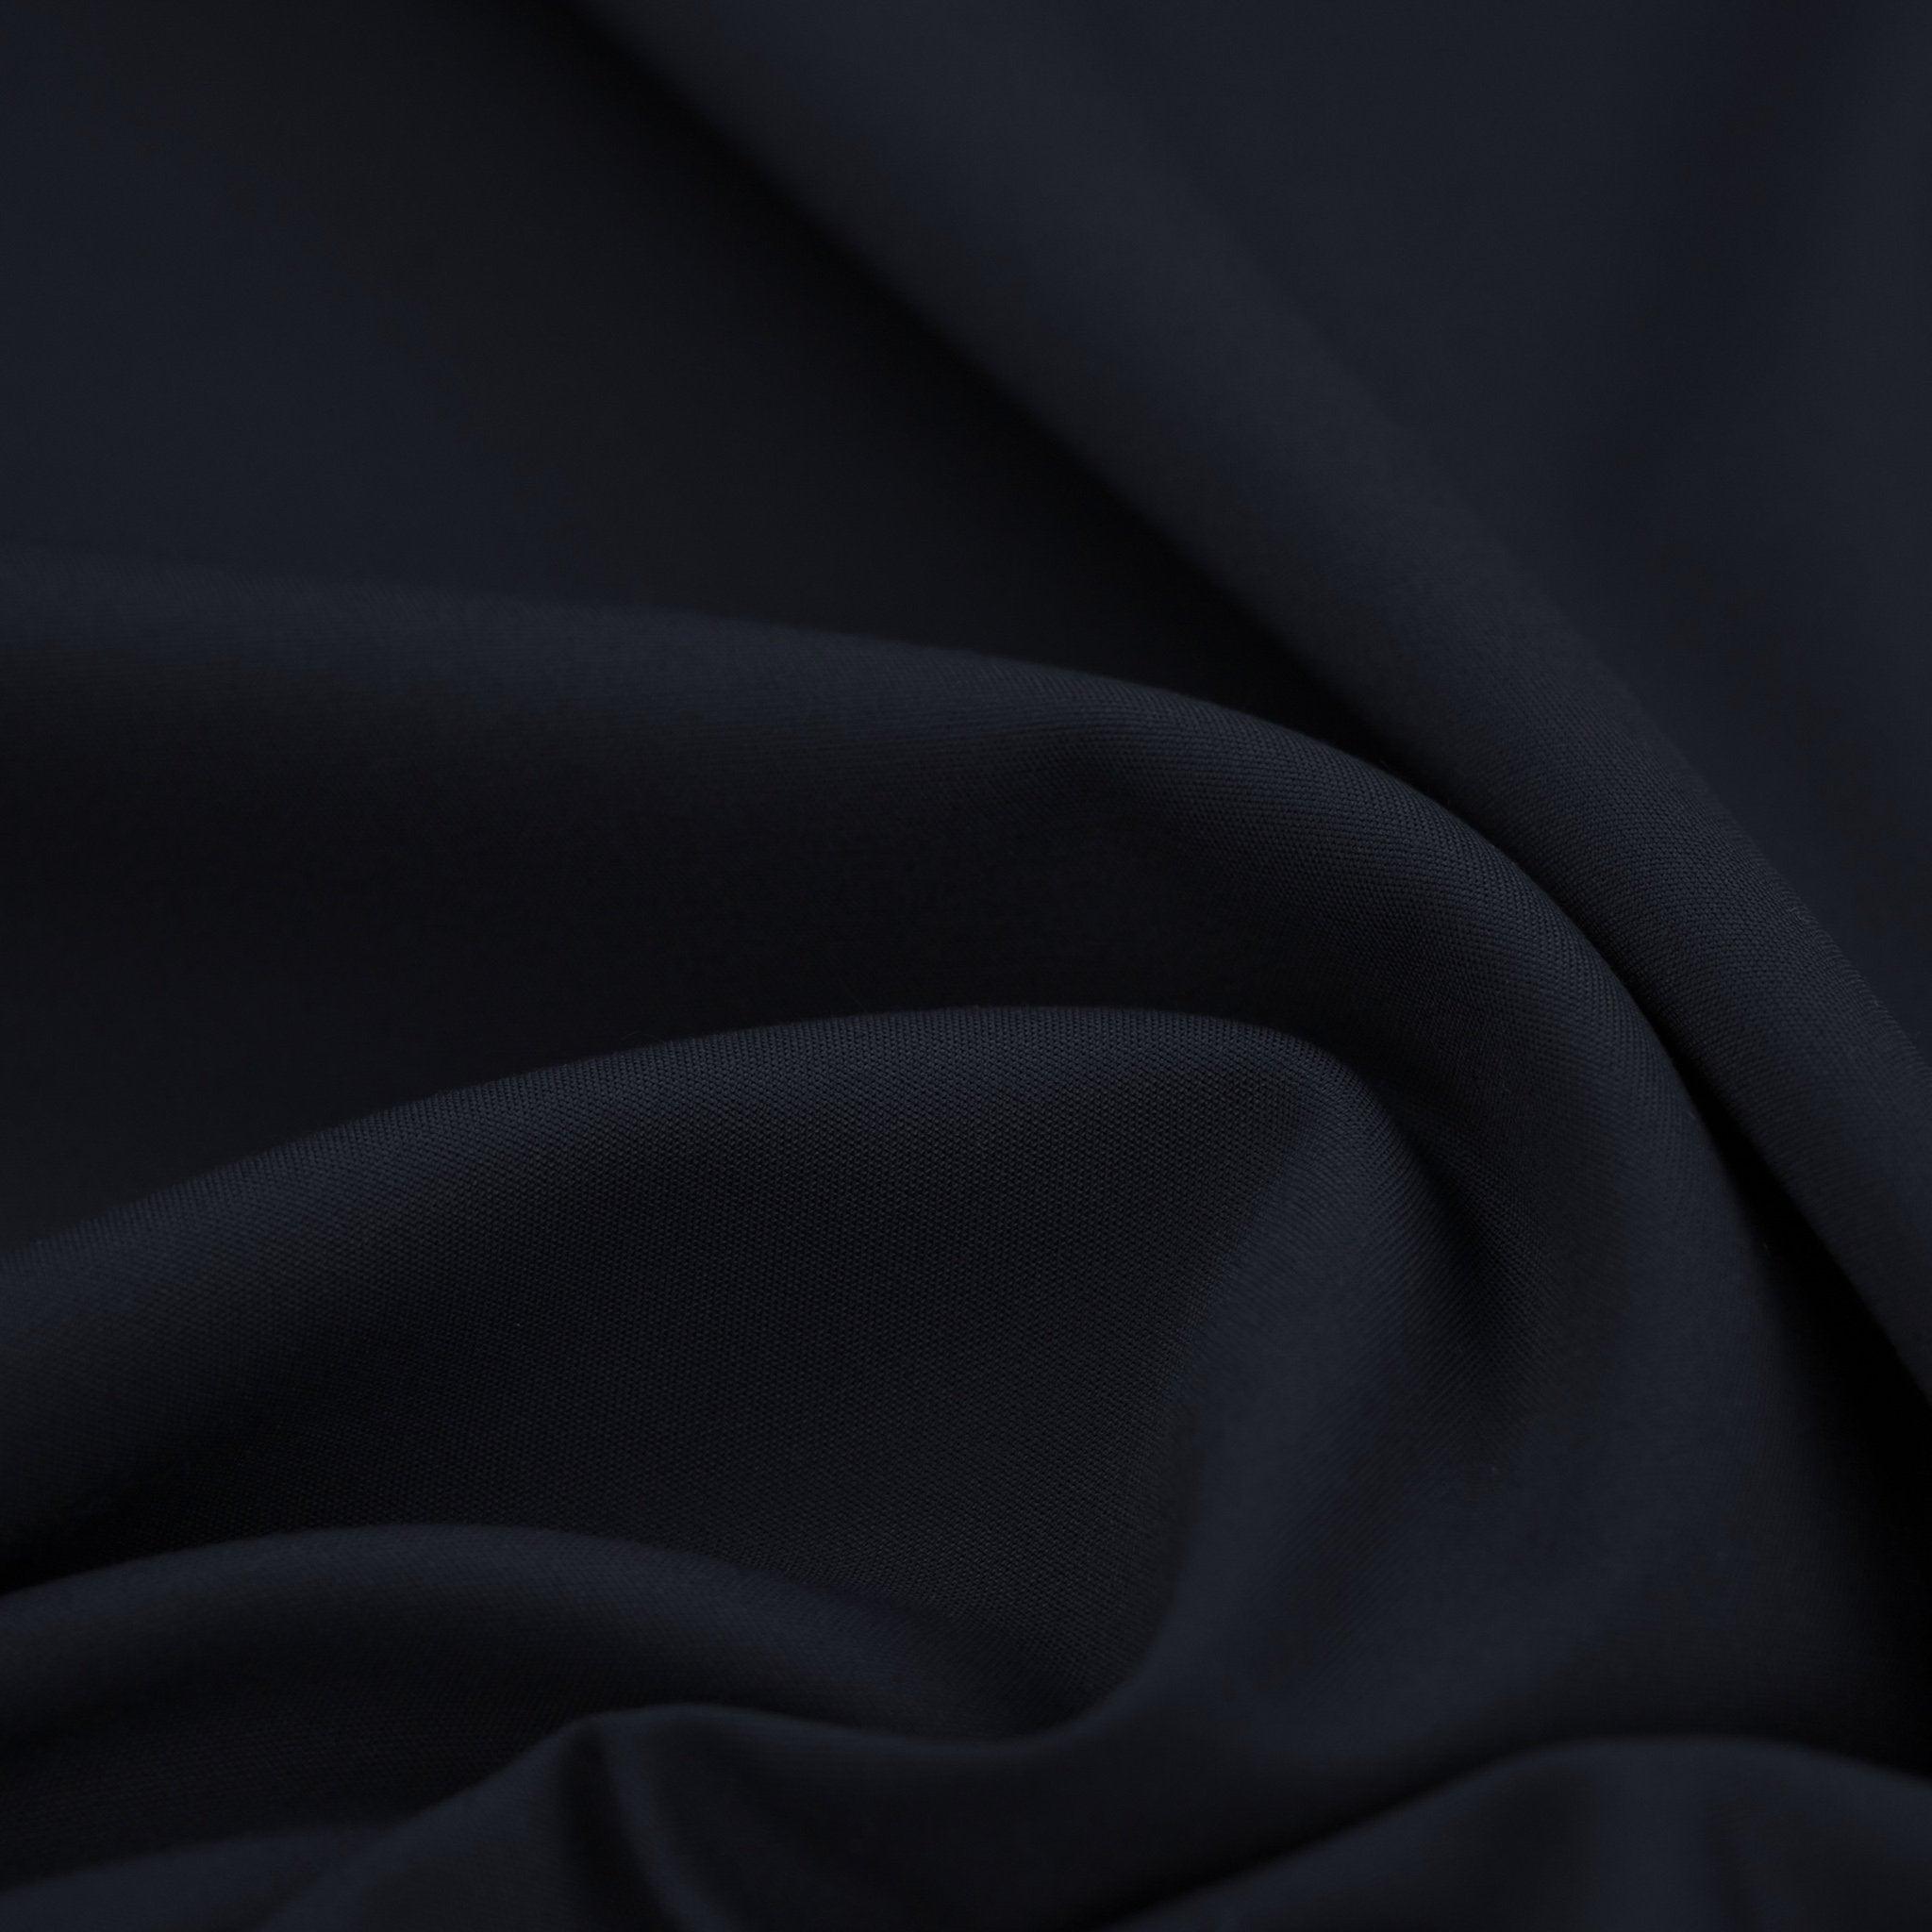 Midnight Double Weave Fabric 97119